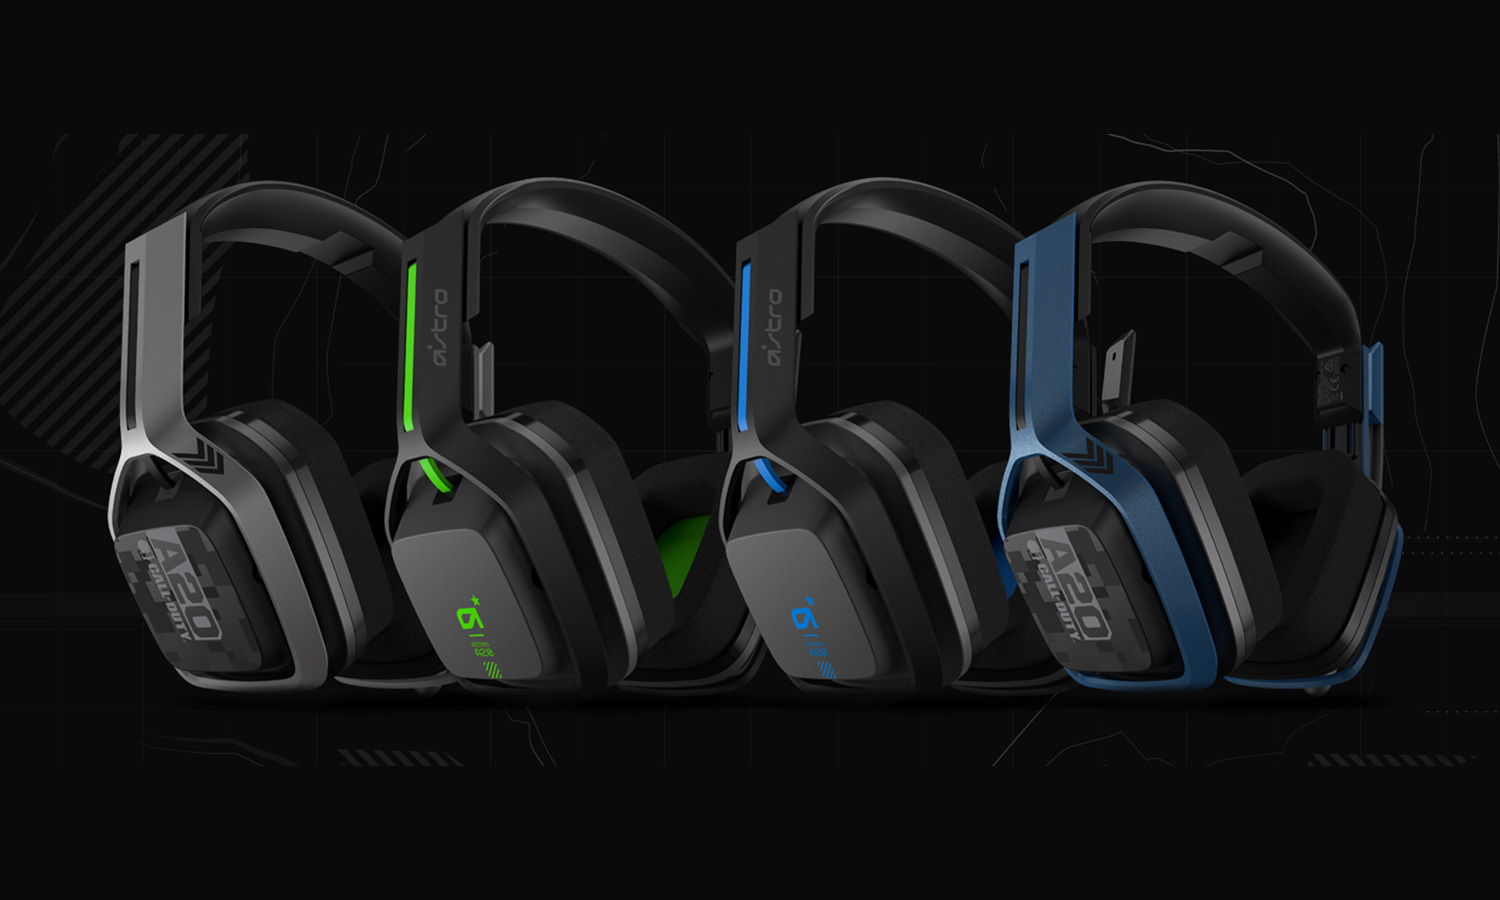 astro a20 headset xbox one